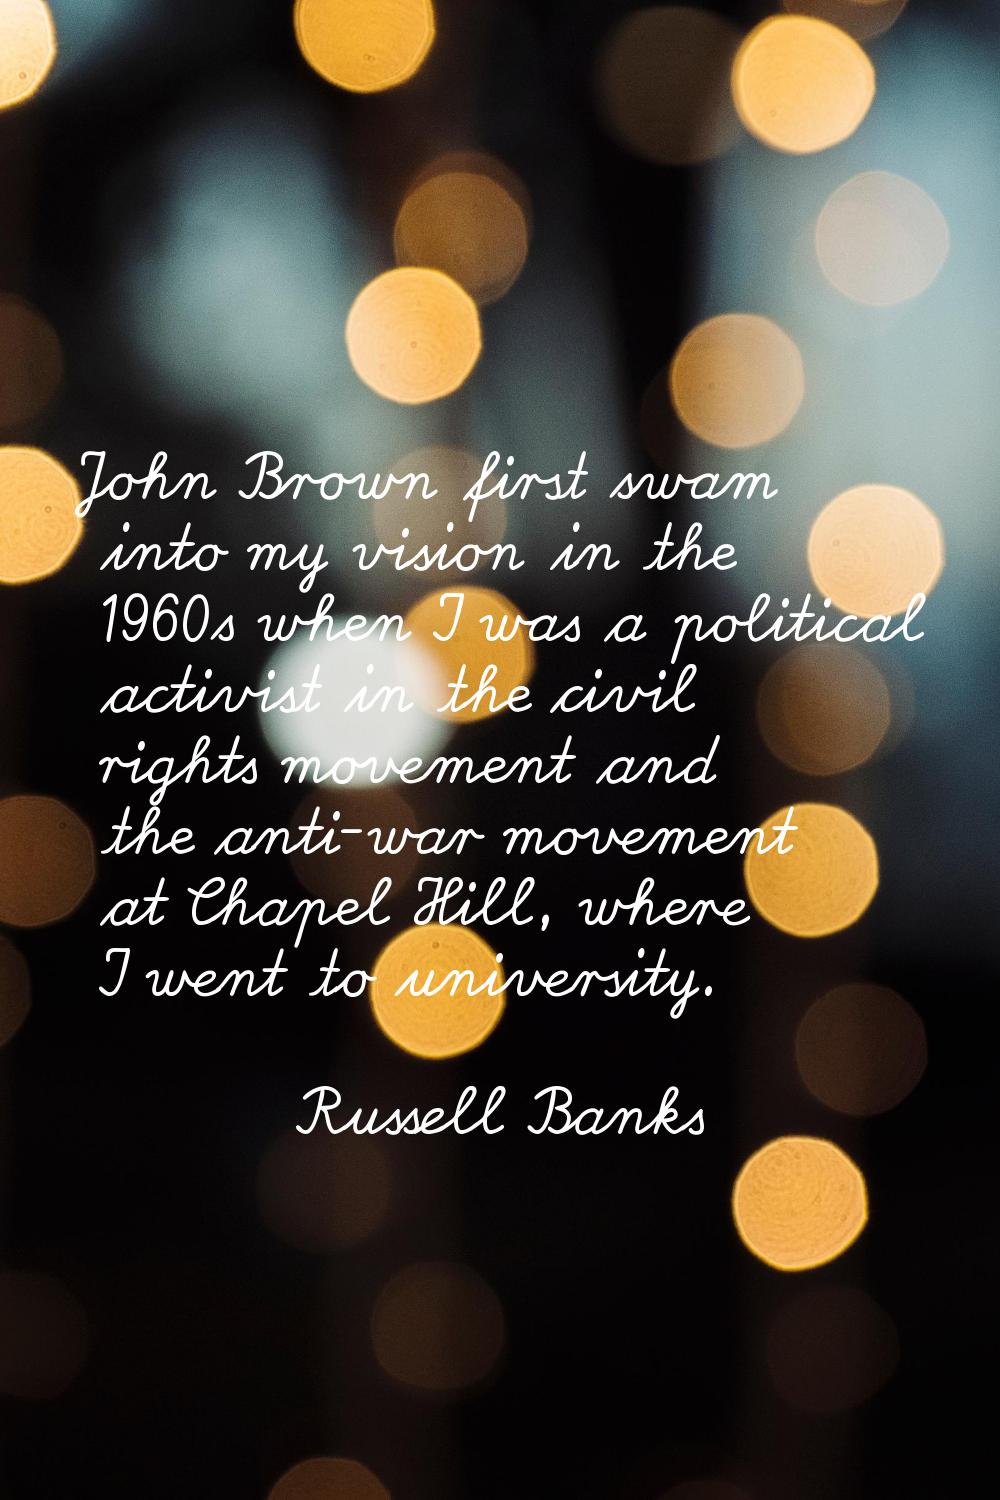 John Brown first swam into my vision in the 1960s when I was a political activist in the civil righ